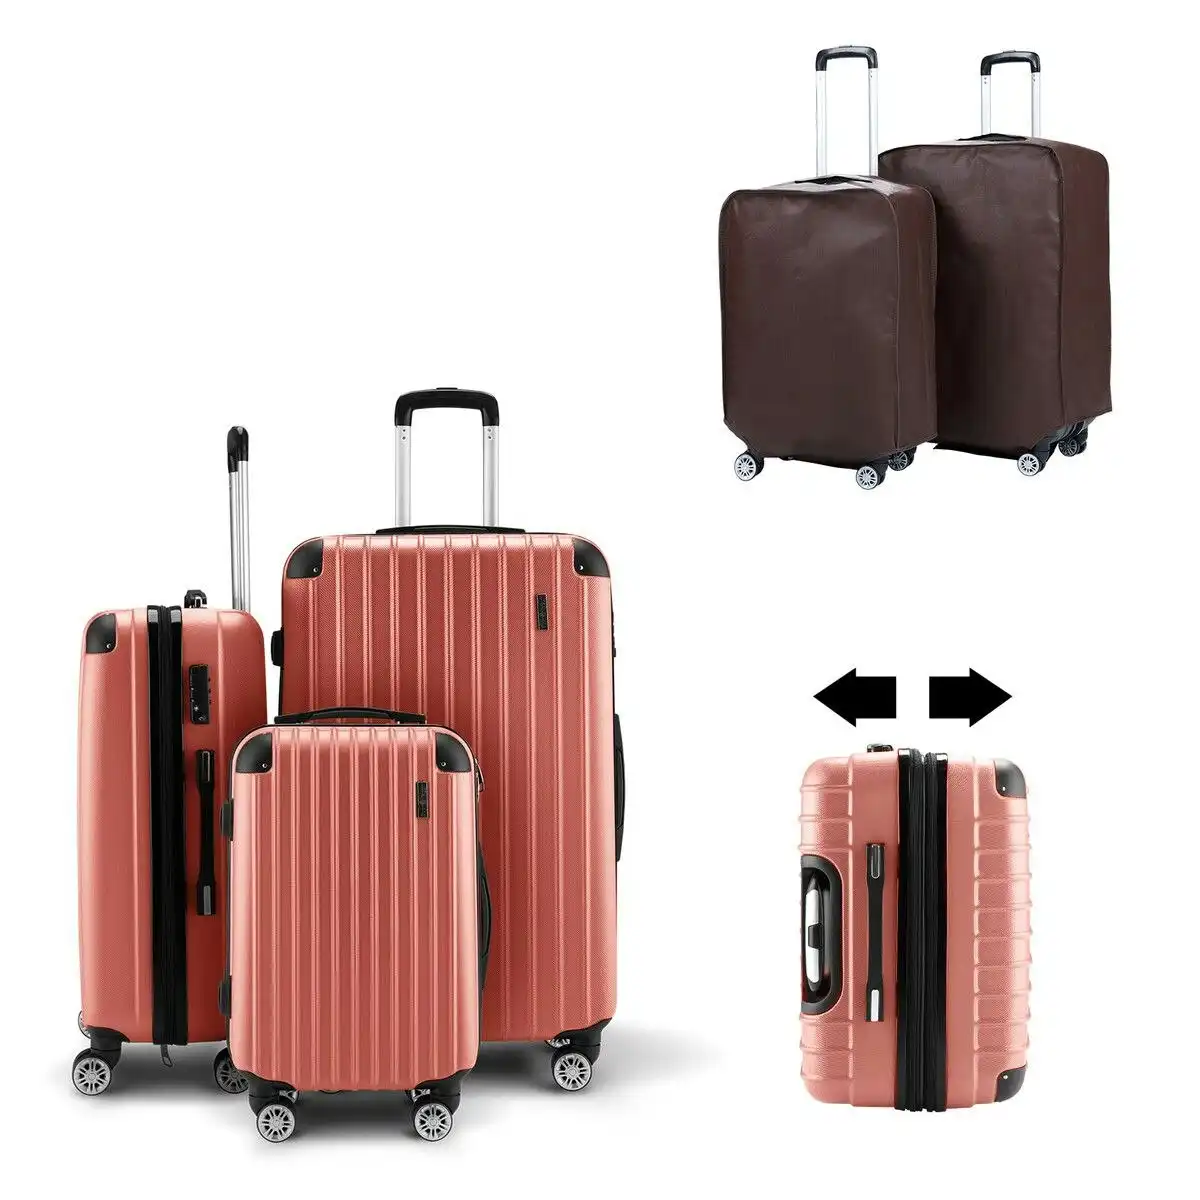 Buon Viaggio 3Pcs Suitcase Luggage Set Expandable Hard Shell Carry On Travel Trolley Lightweight Cabin TSA Lock 2 Covers Rose Gold